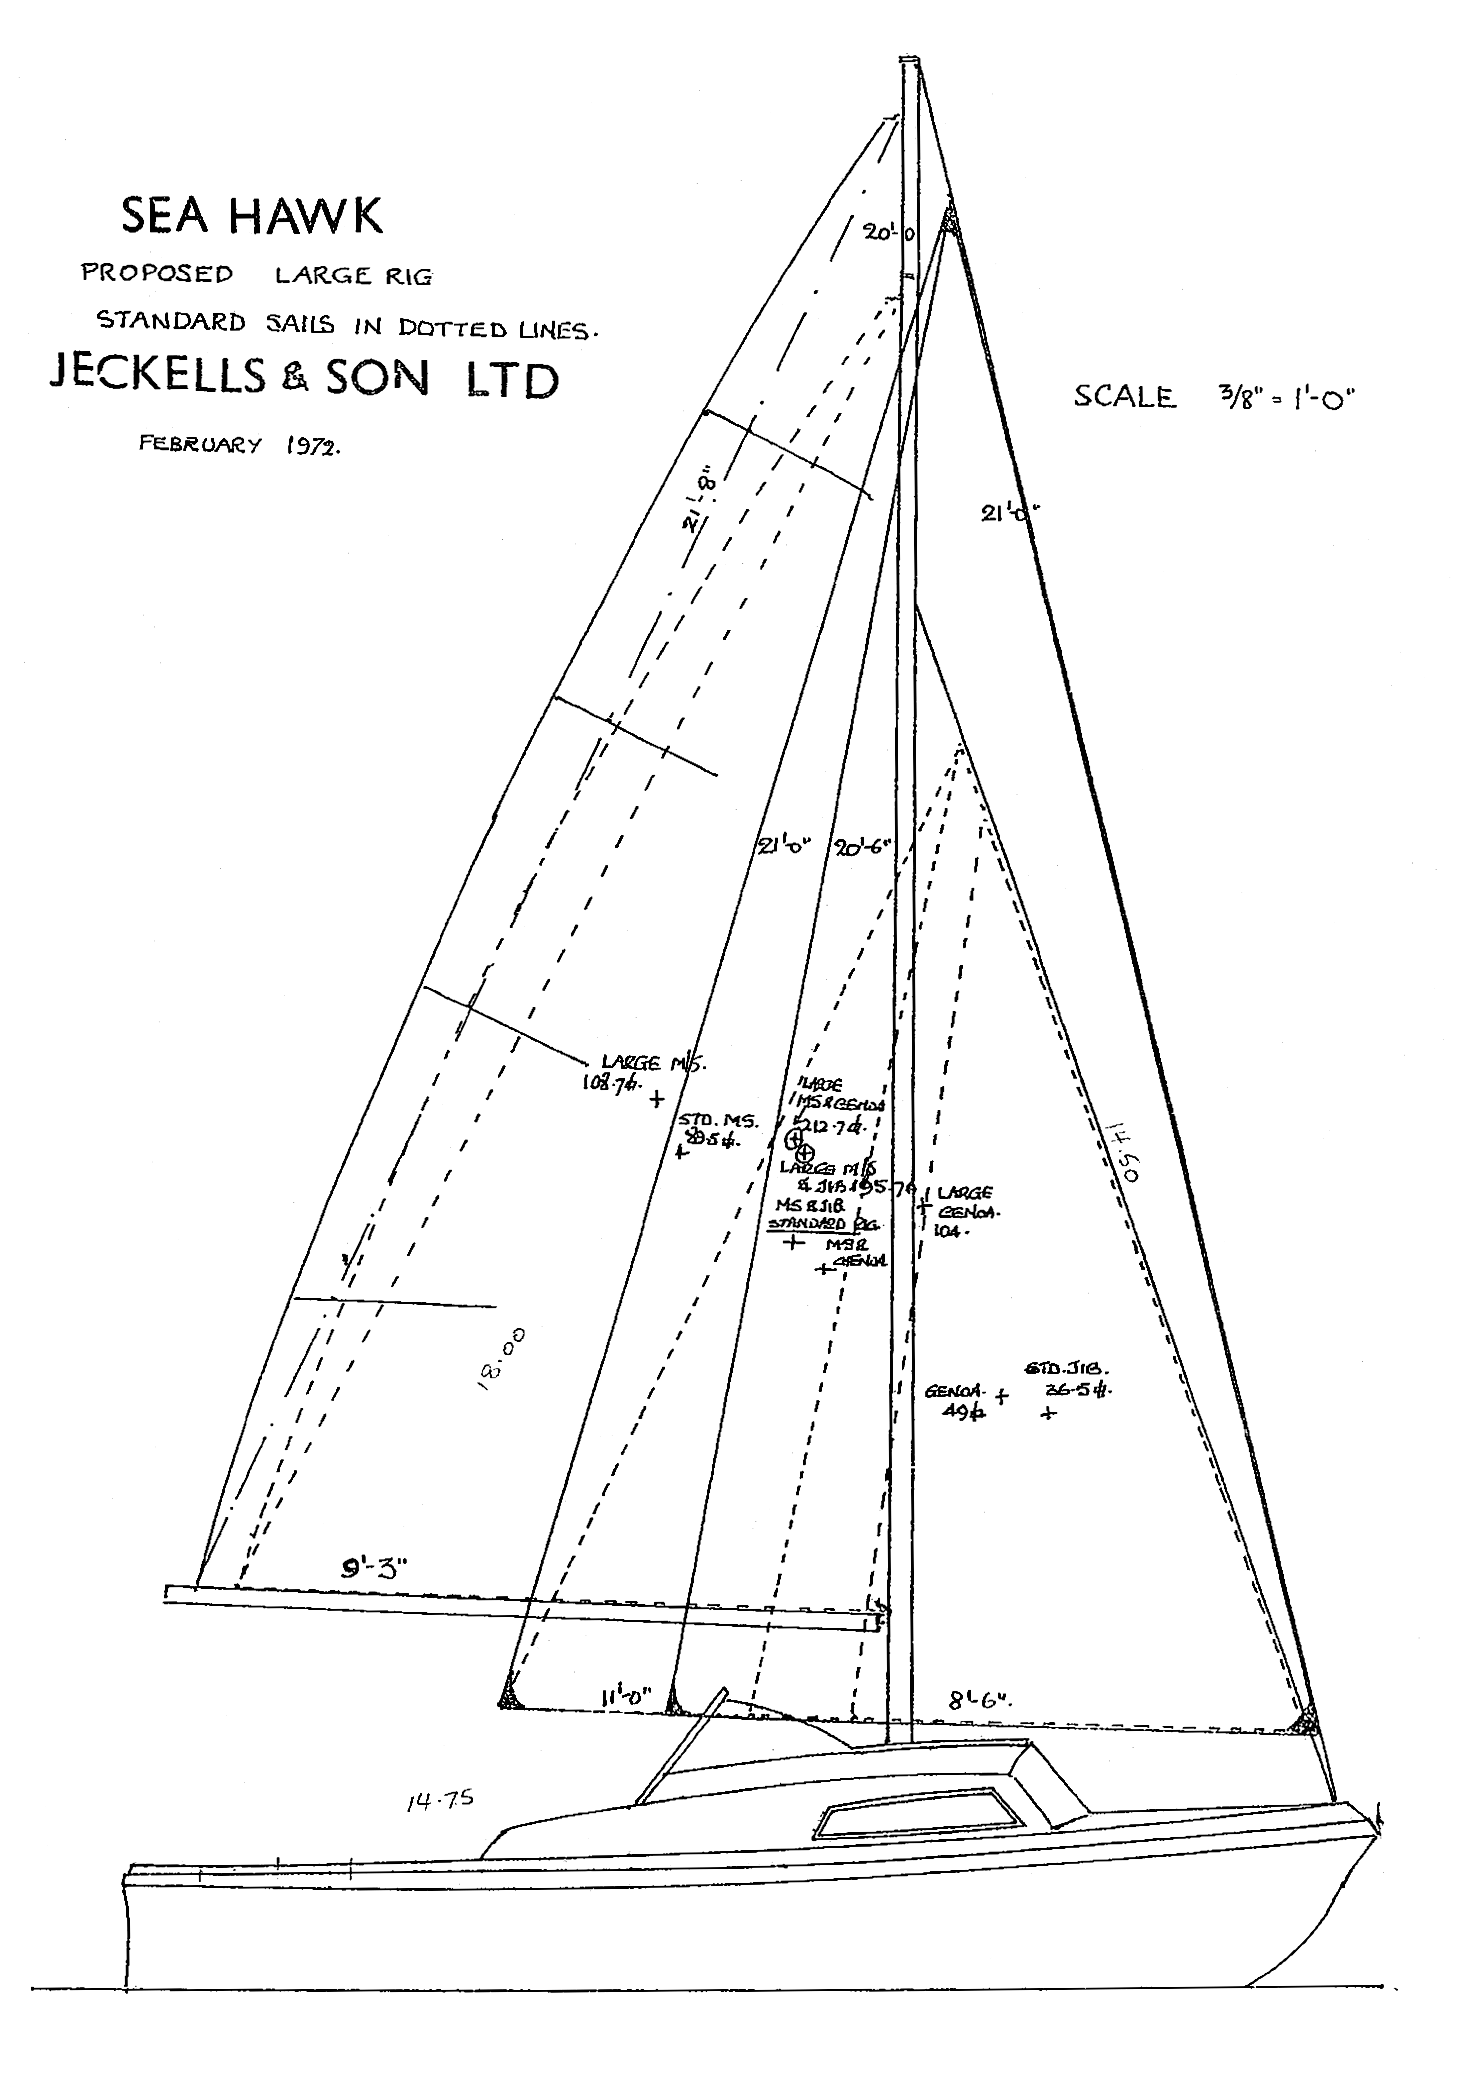 Sketch of Large Rig from Jeckell's archives.